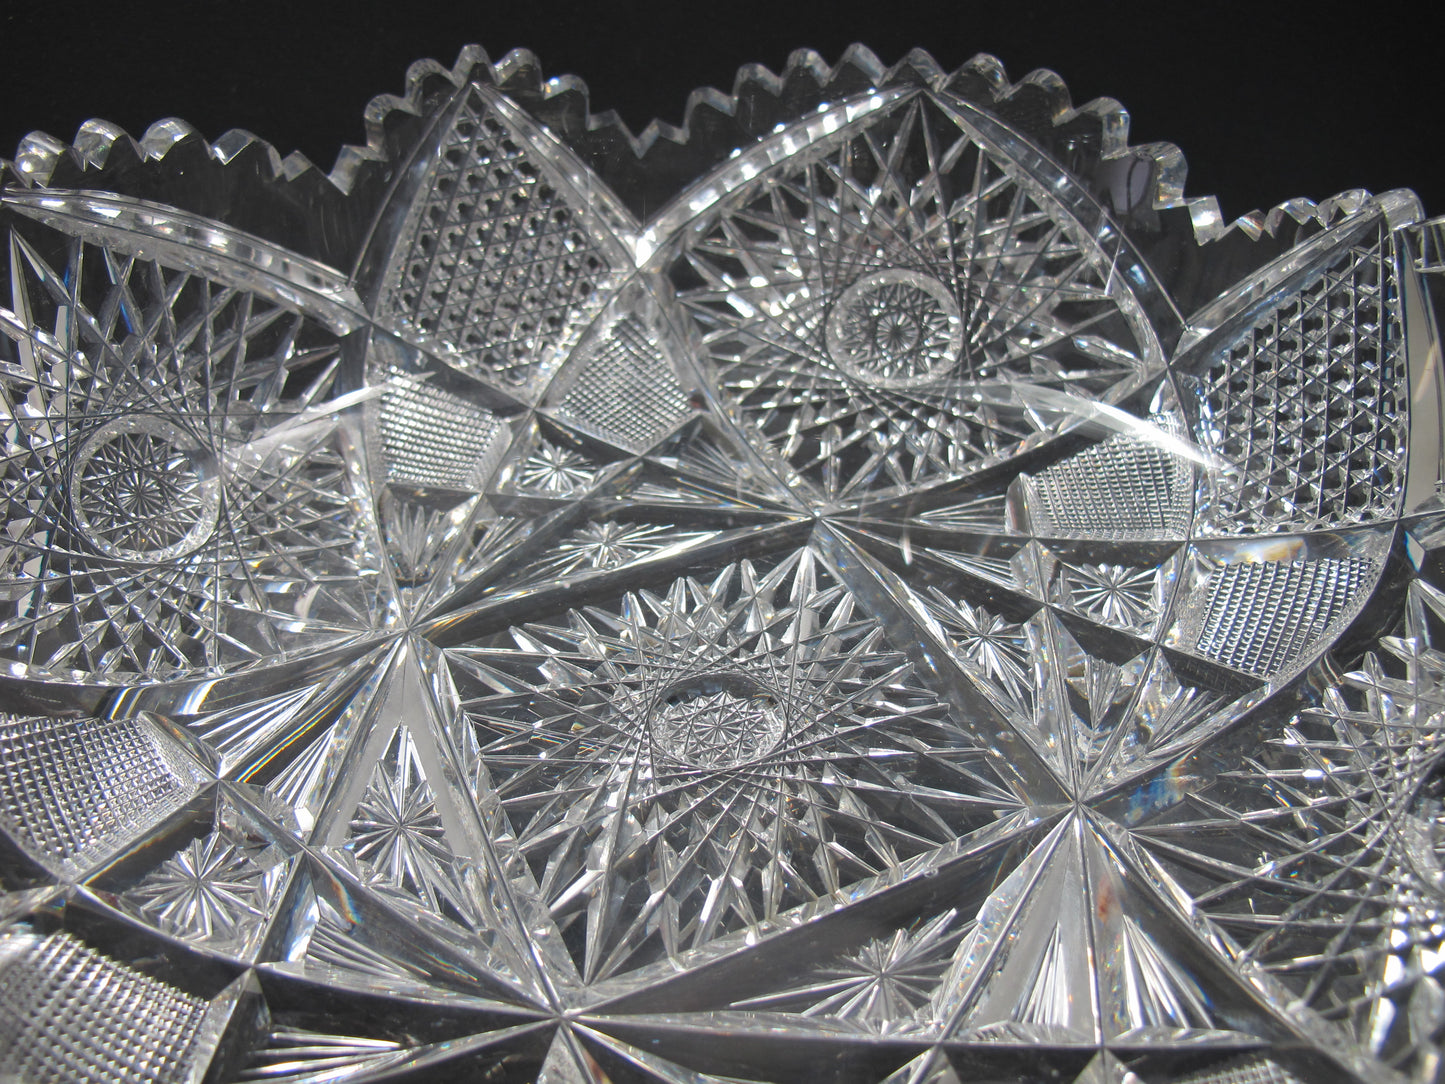 American Brilliant Period Cut Glass low bowl Antique crystal Sharp - O'Rourke crystal awards & gifts abp cut glass